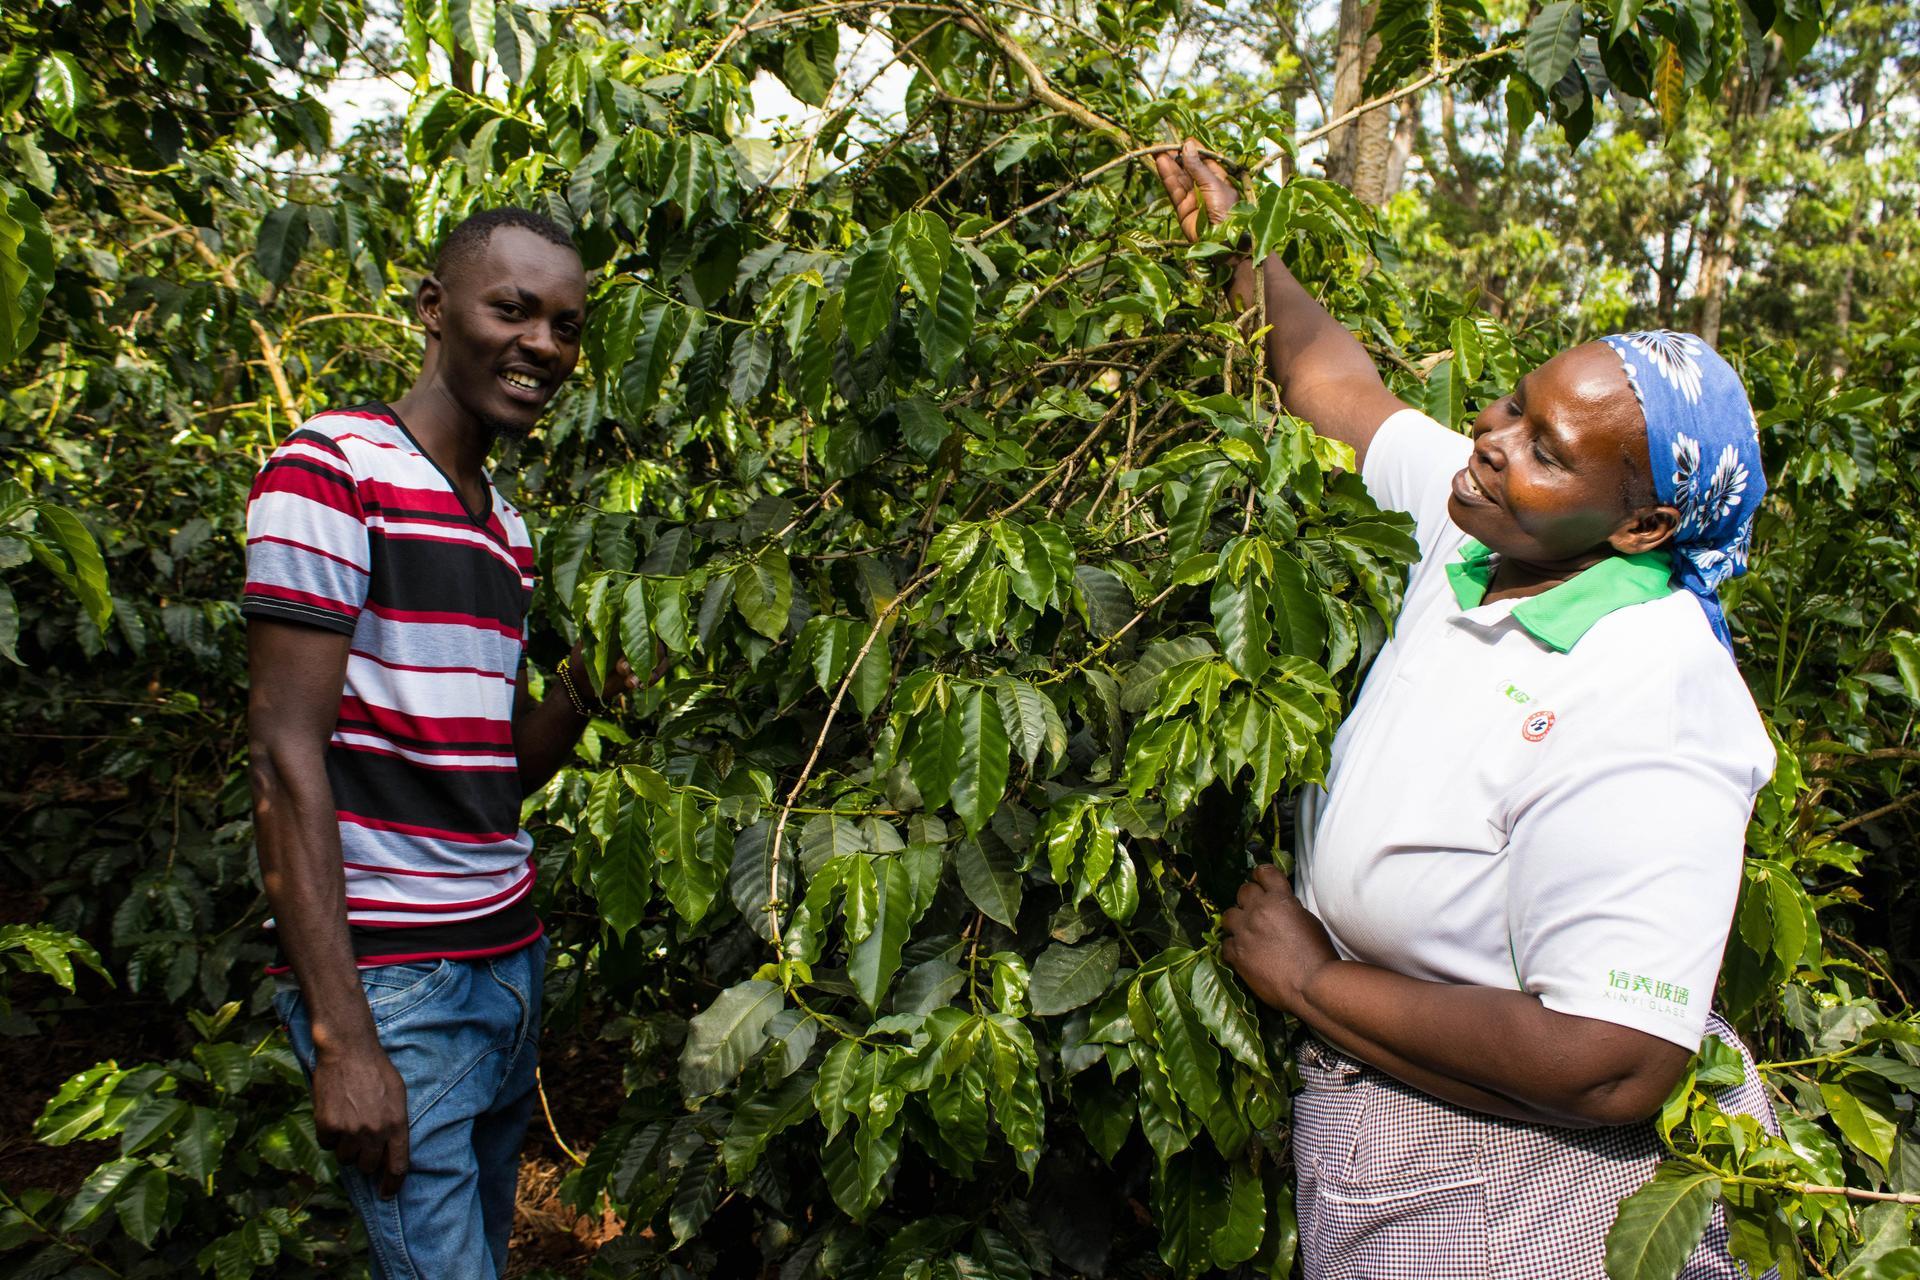 Regenerative agriculture a new value proposition for Kenya’s coffee sector - Alliance Bioversity International - CIAT